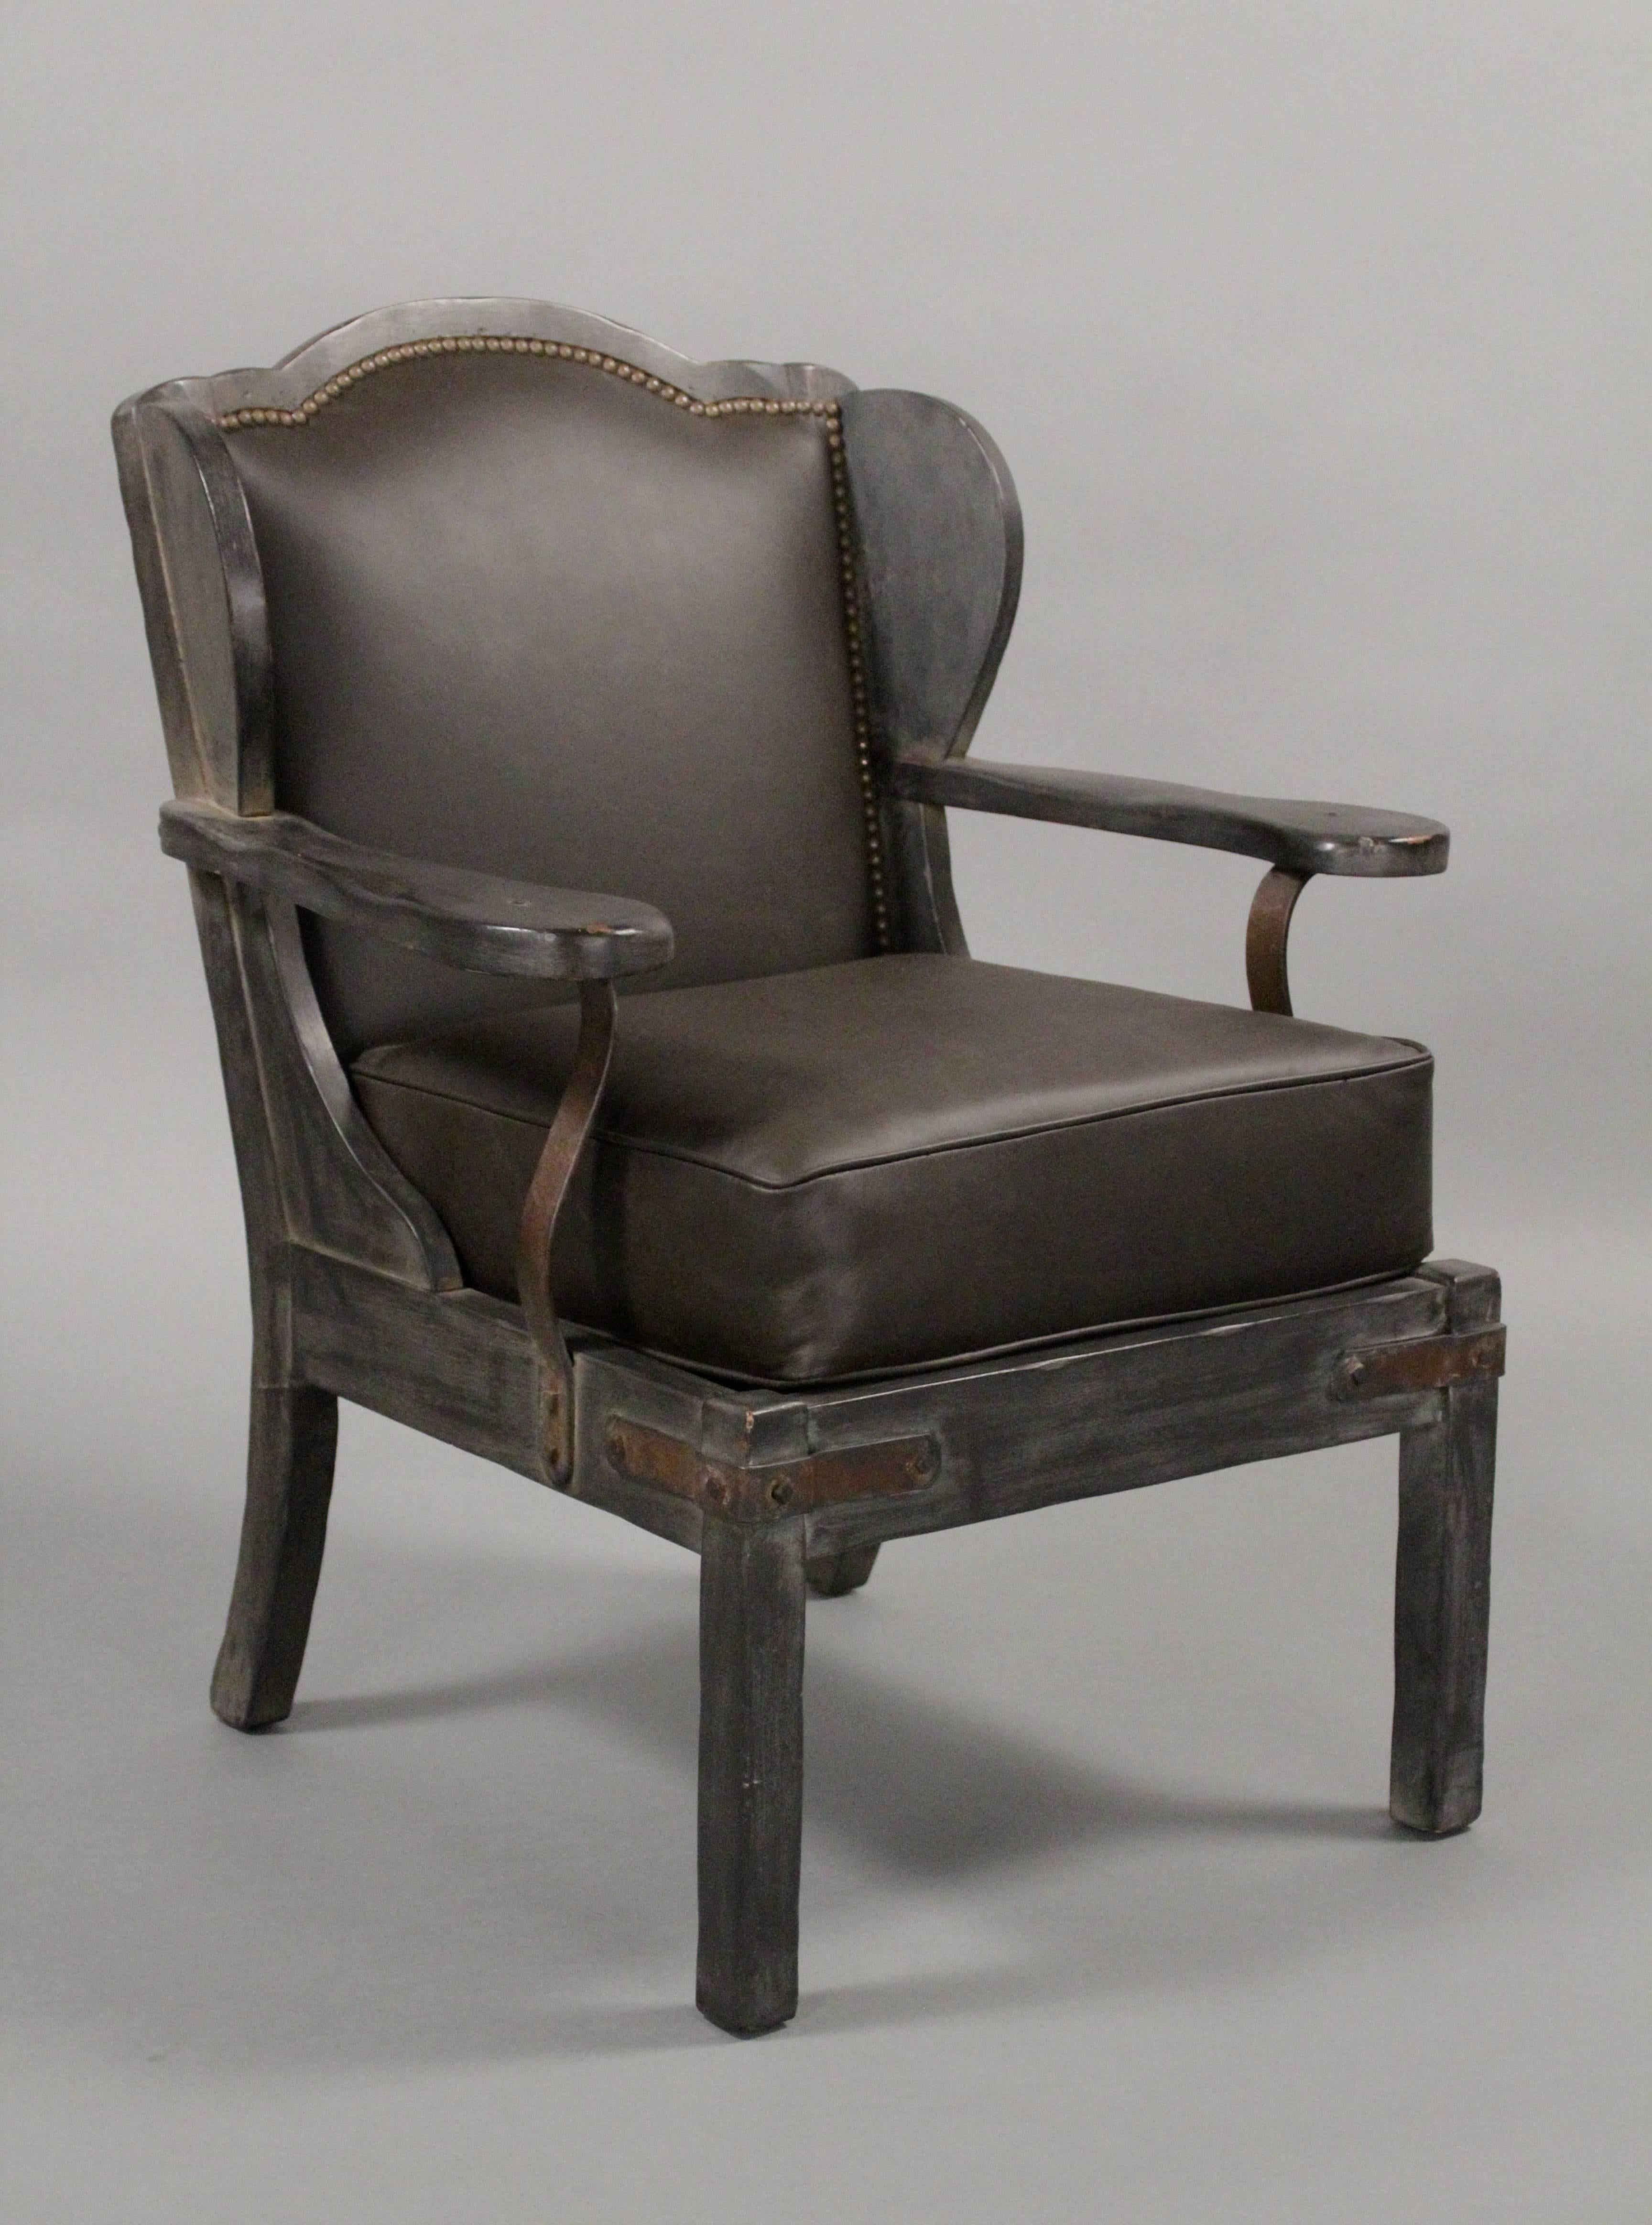 Rancho Monterey period wing back chairs with great iron strapping. Restored finish.